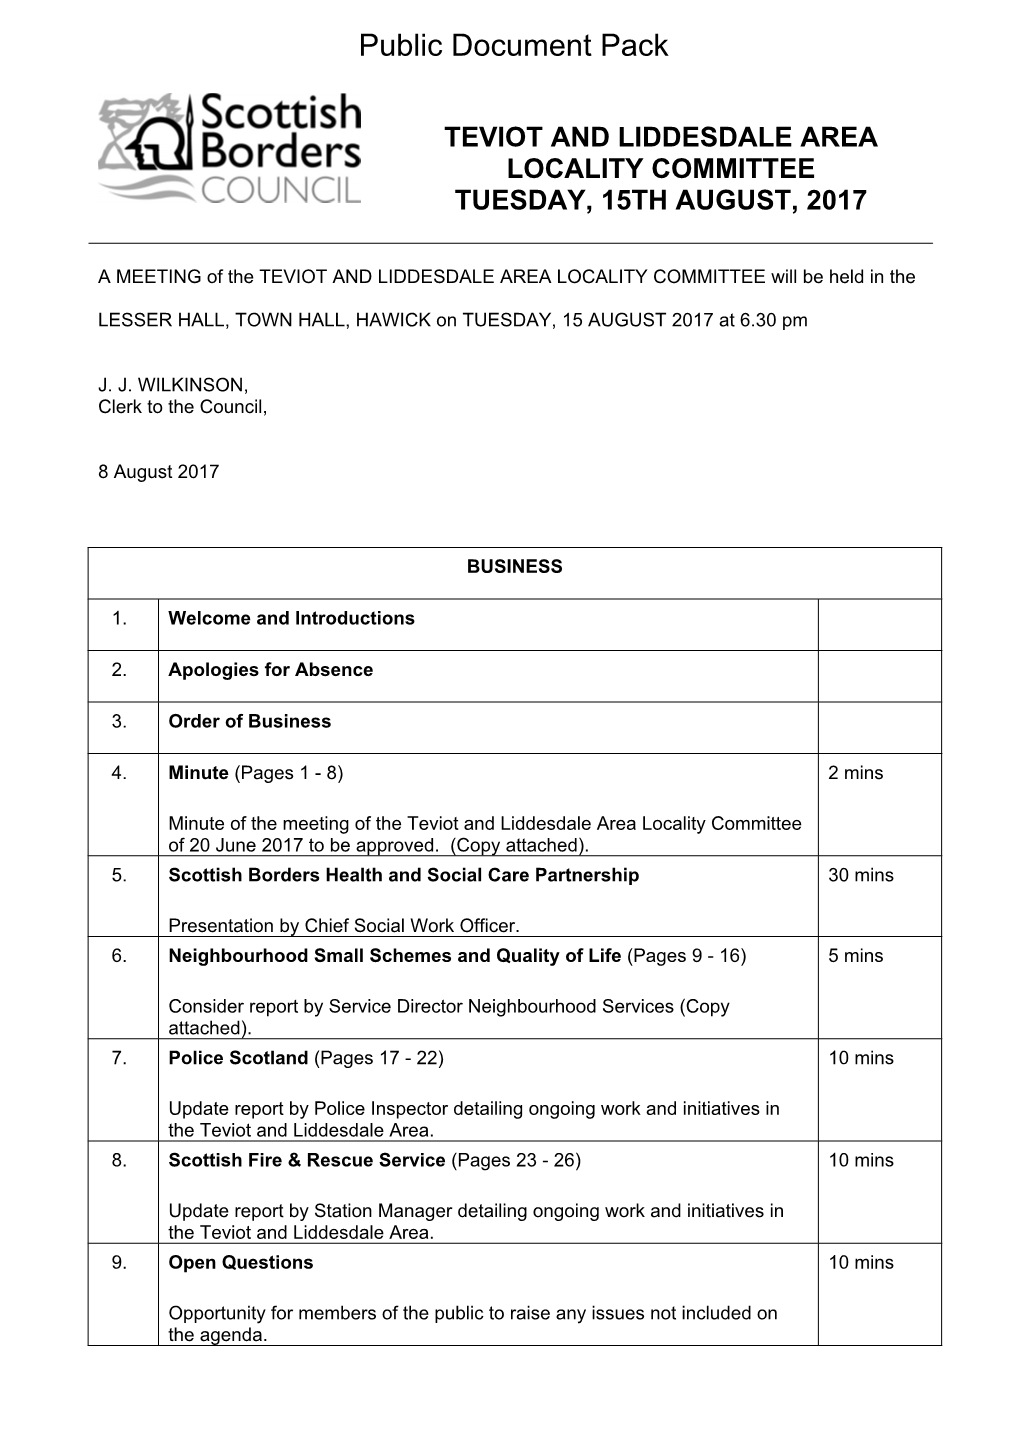 (Public Pack)Agenda Document for Teviot and Liddesdale Area Locality